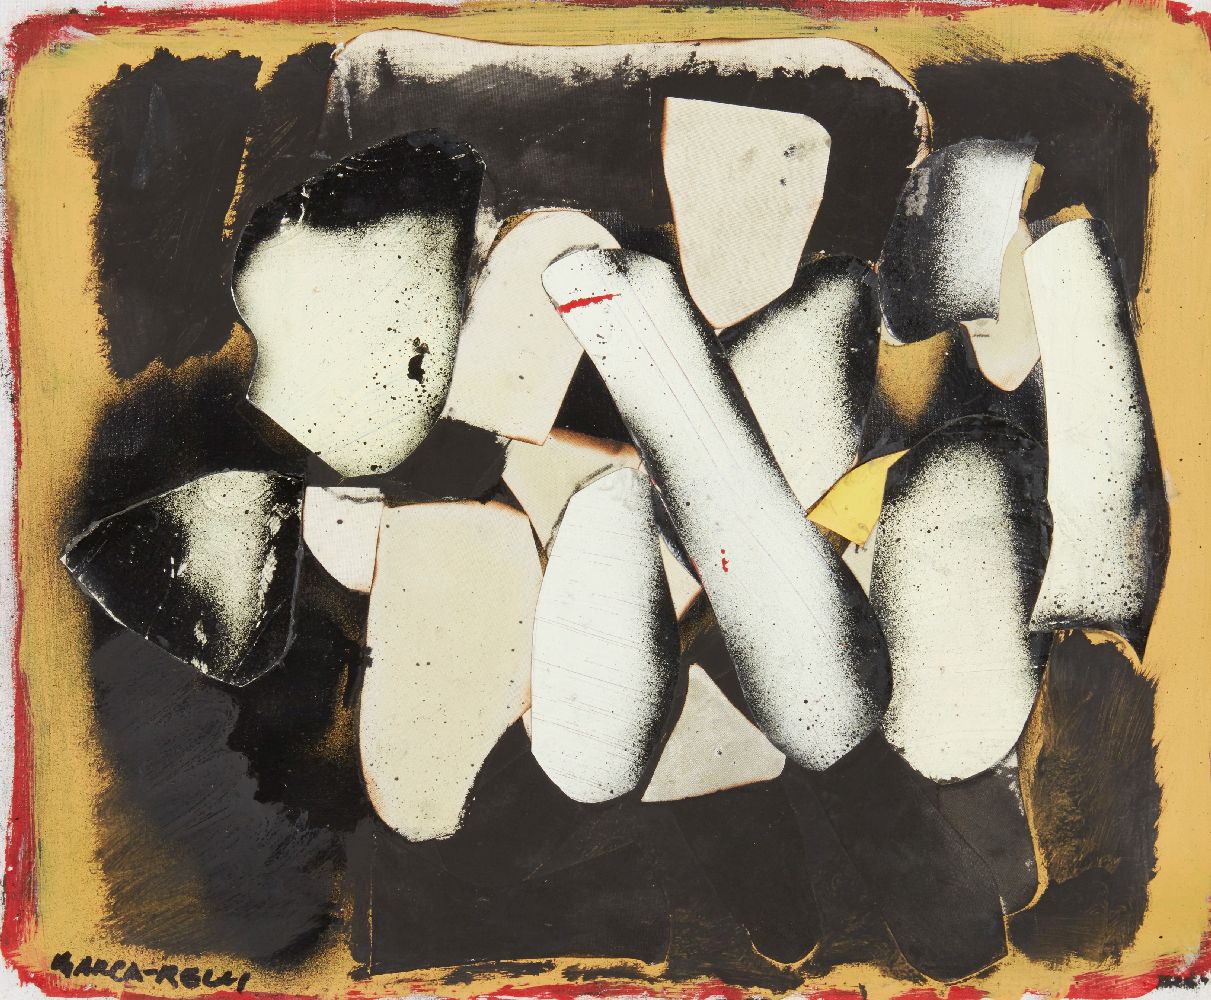 Conrad Marca-Relli, American 1913-2000- Untitled, late 1970s; mixed media and collage on canvas laid